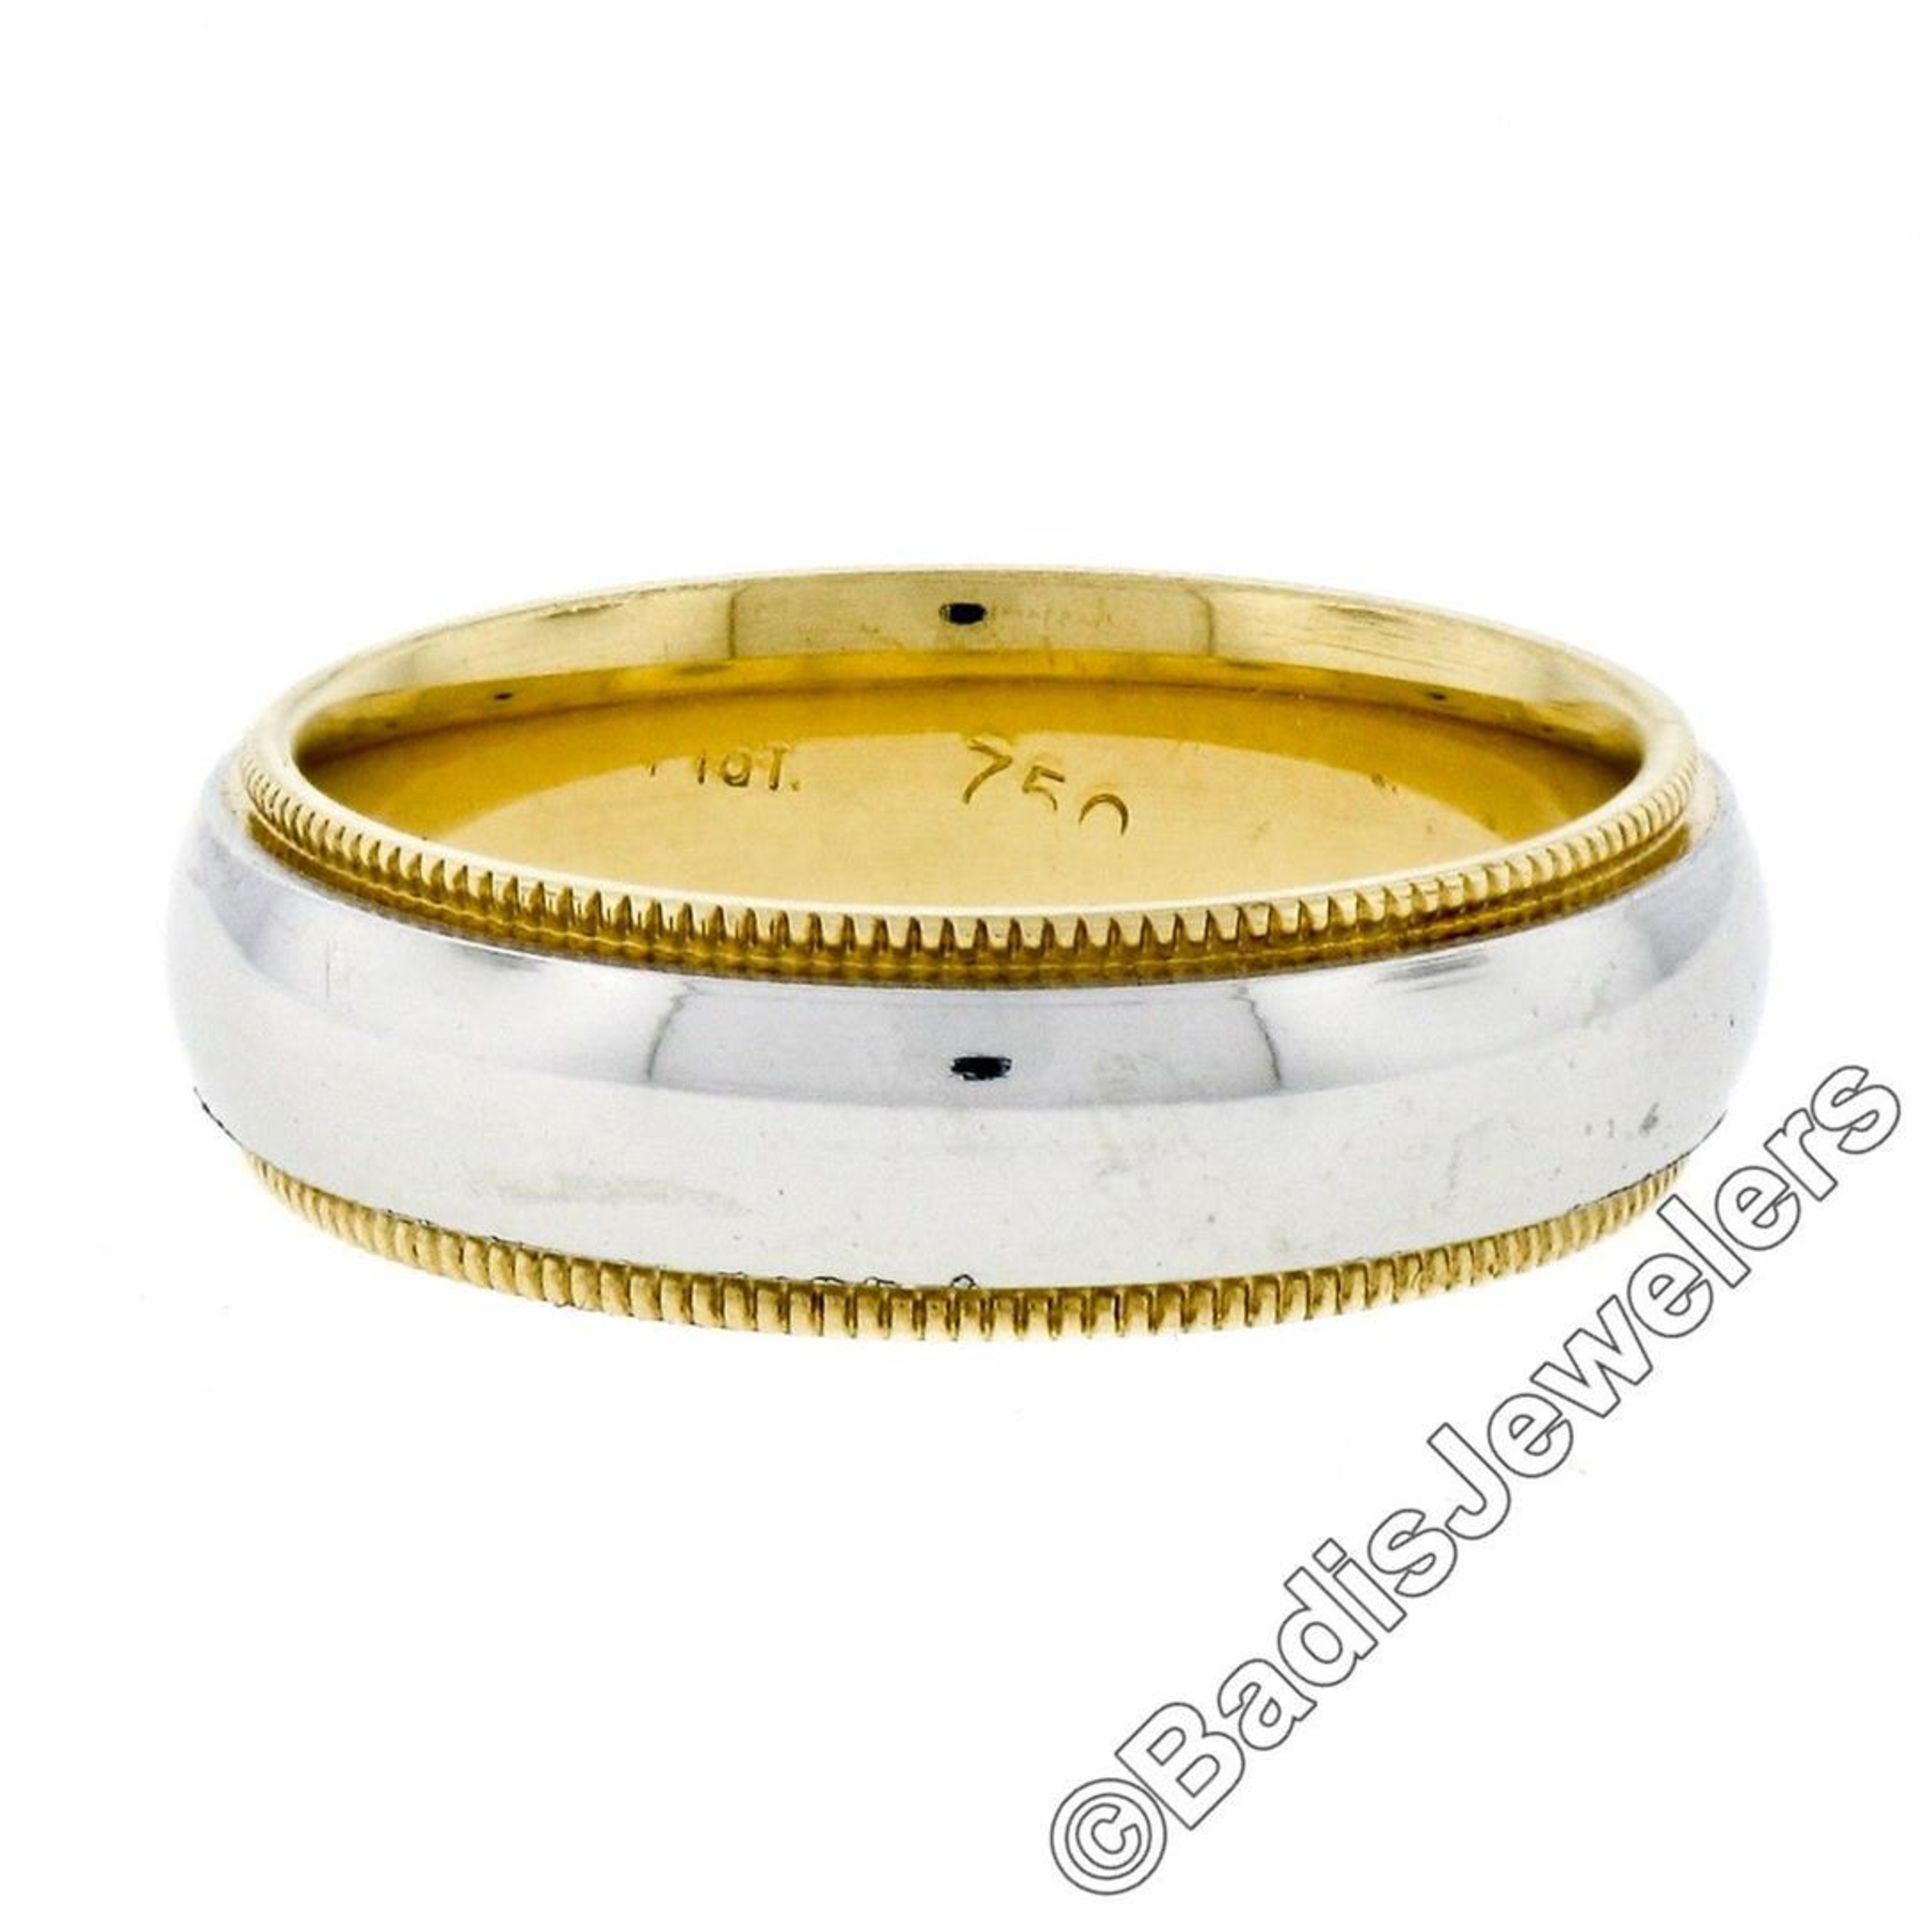 Men's 18kt White and Yellow Gold 5.5mm Milgrain Edged Band Ring - Image 7 of 7